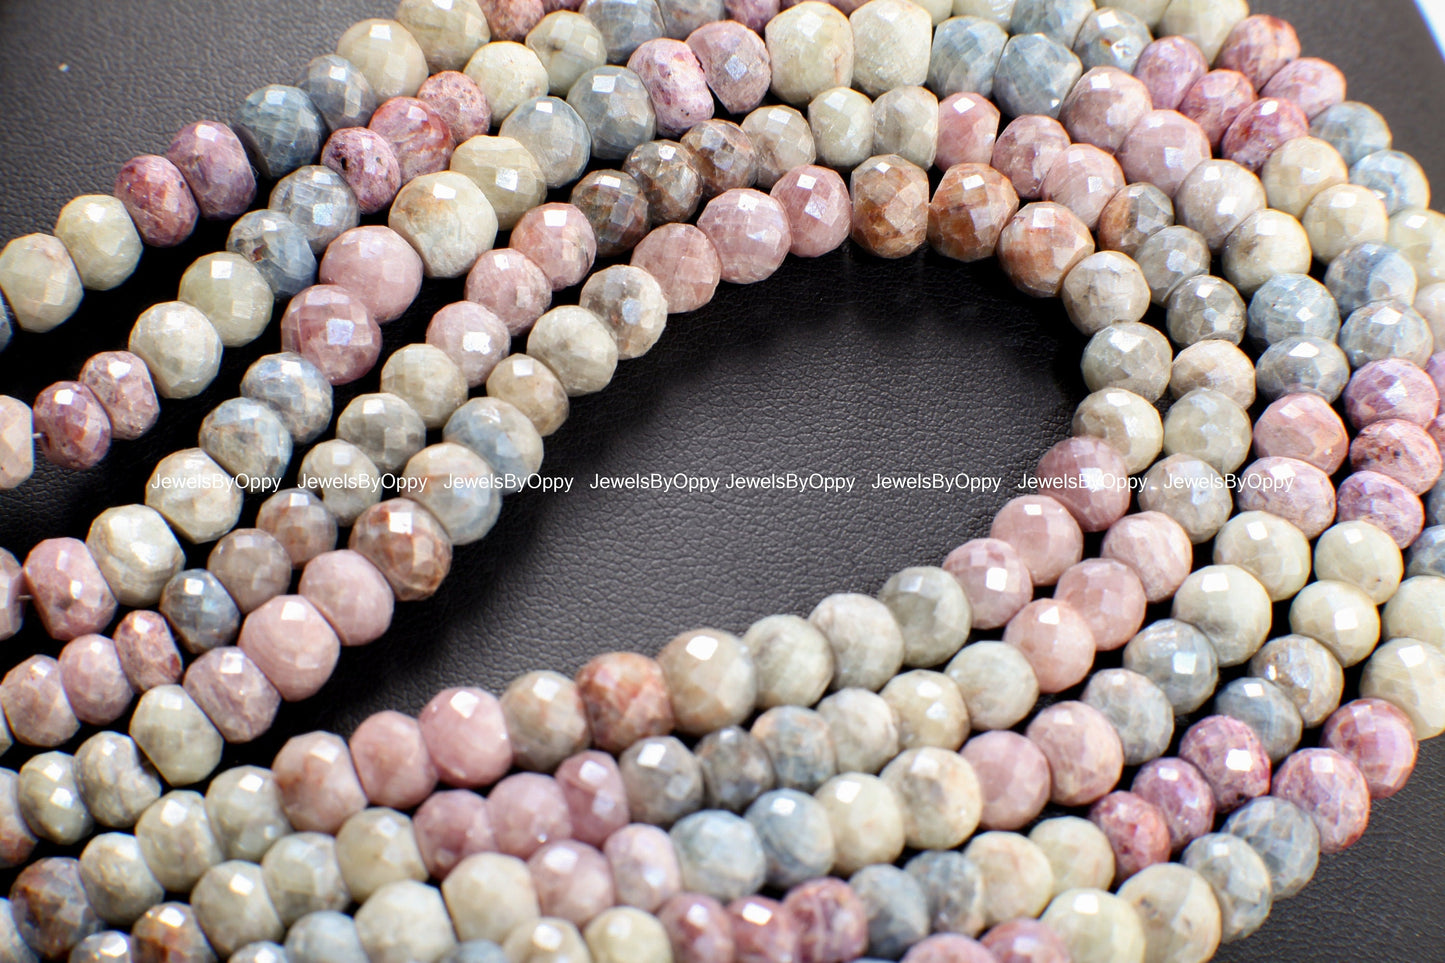 Natural Multi Pink Silverite Sapphire Faceted Rondelle 6.5-8mm, Rare , heavy weight , Jewelry Making Gemstone Beads 3&quot;,6&quot;,13&quot; Strand